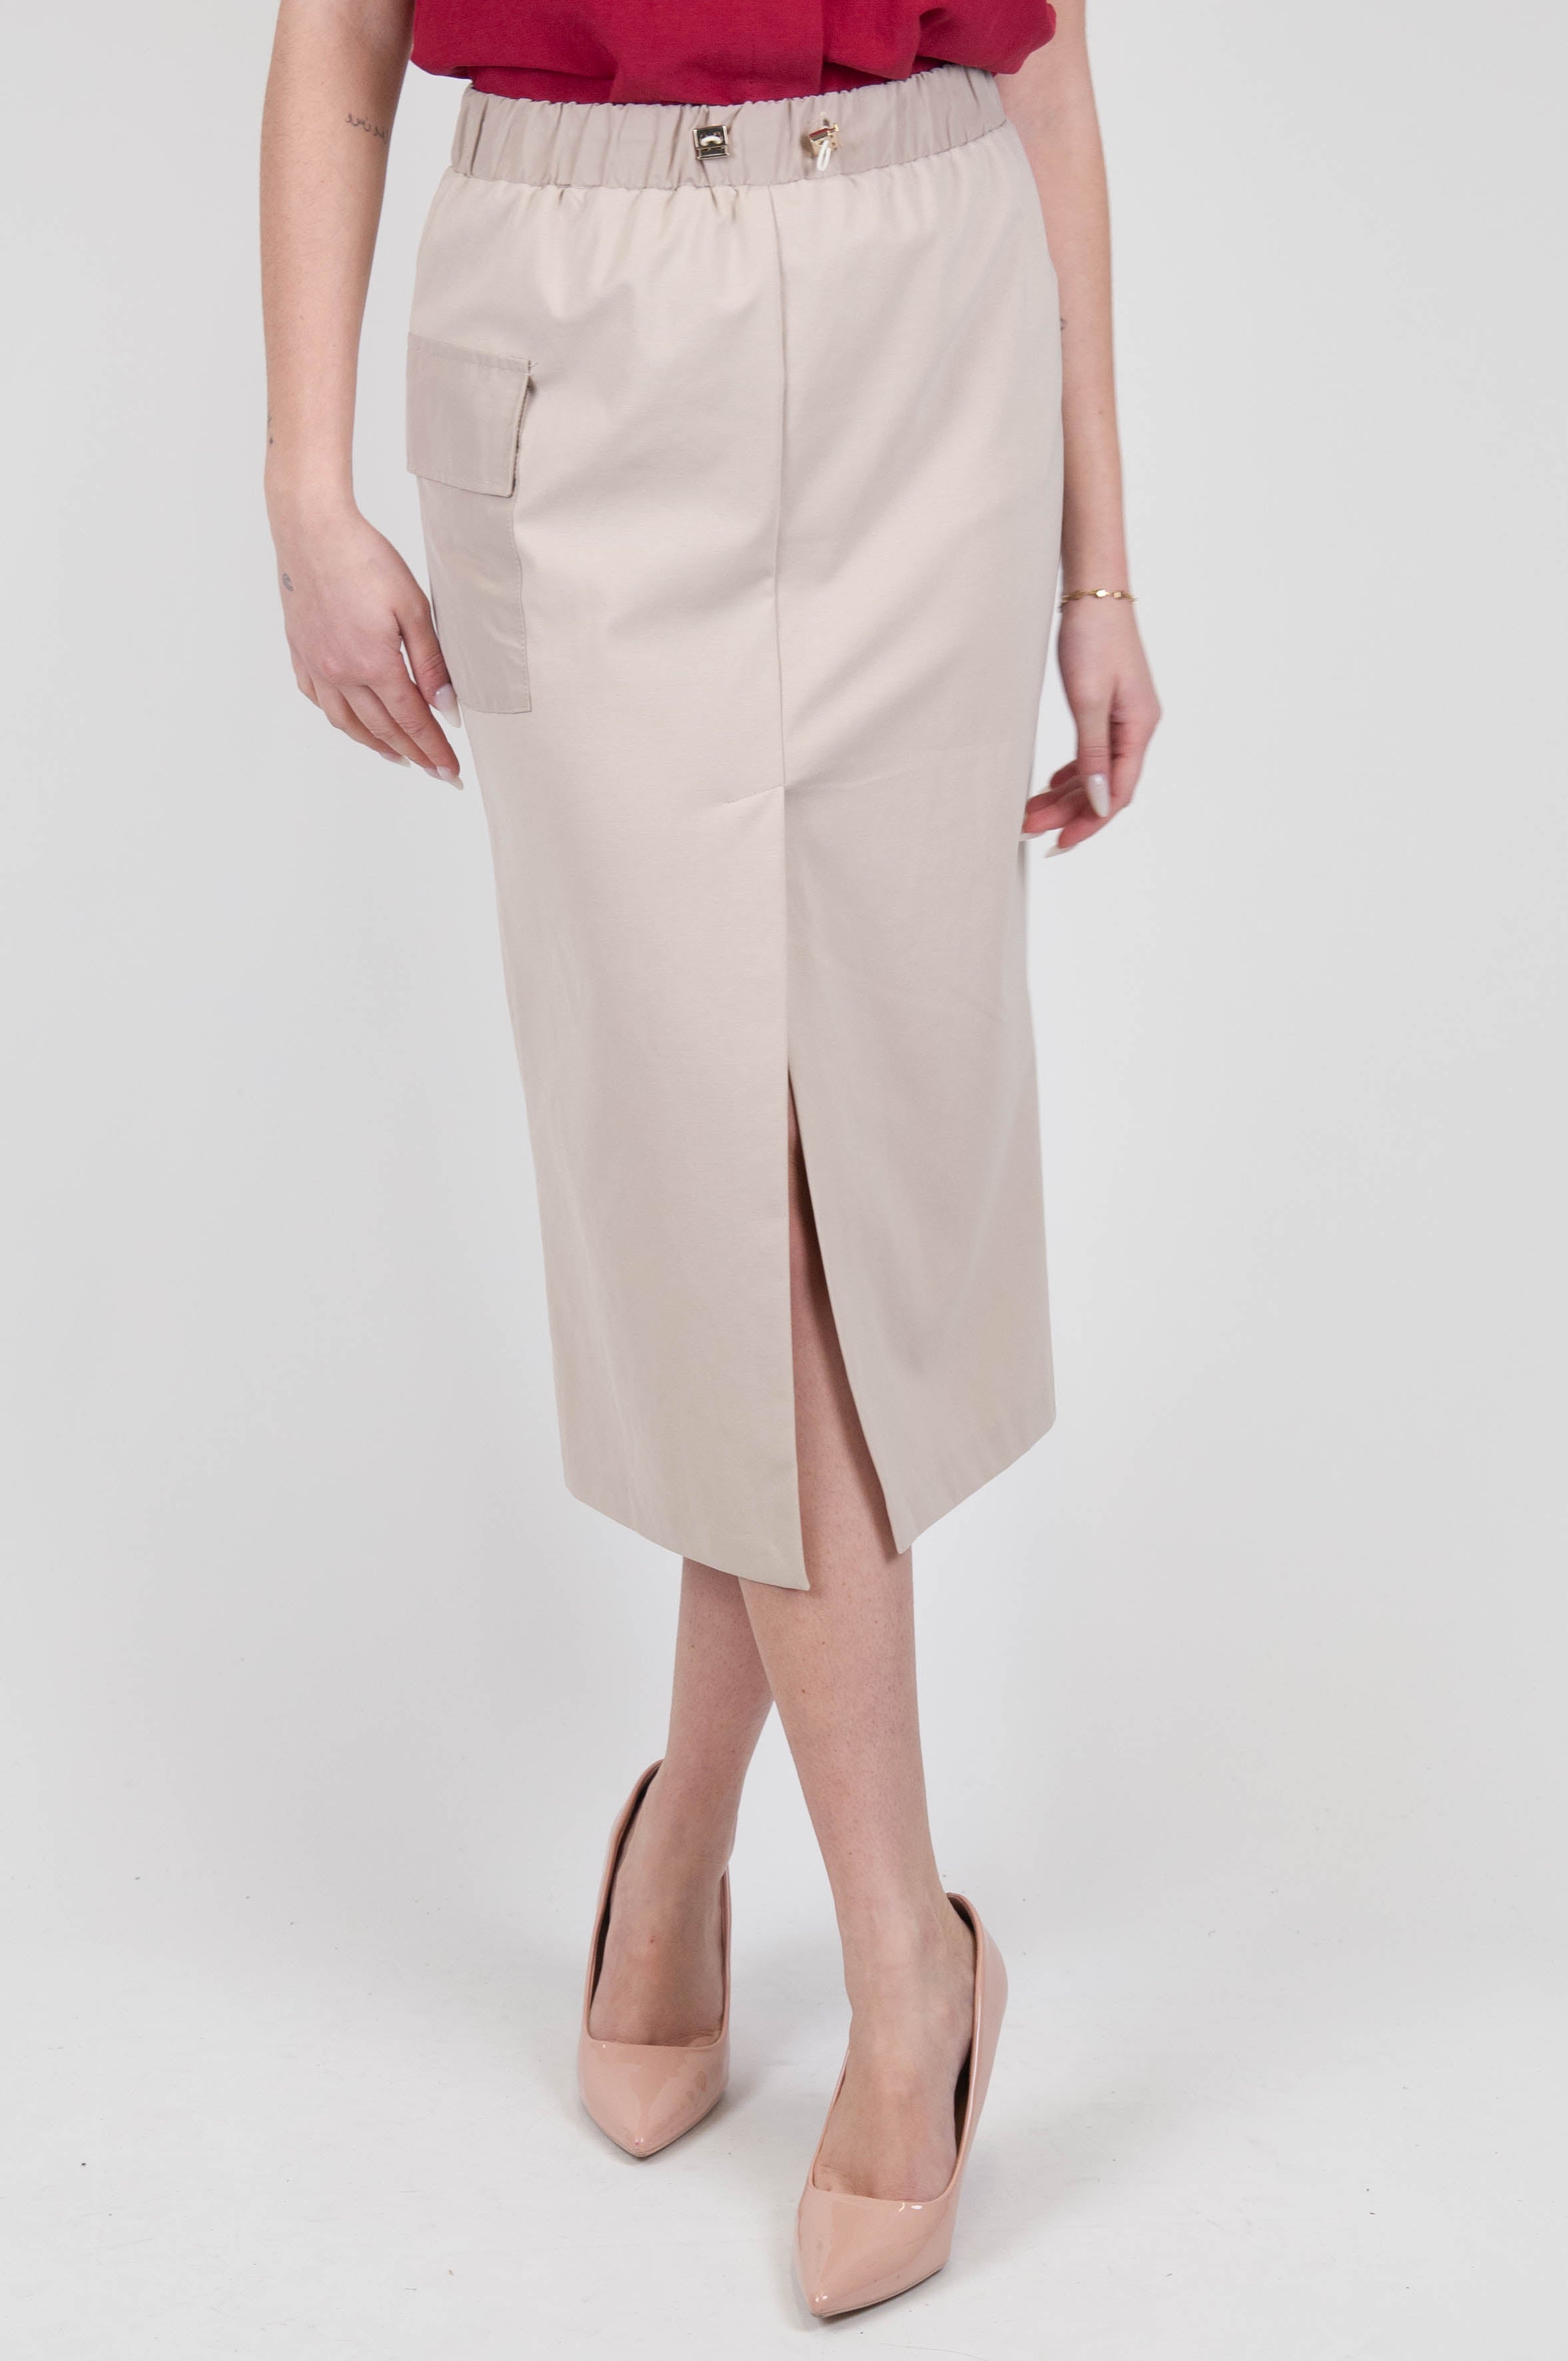 Haveone - Skirt with drawstring and front slit